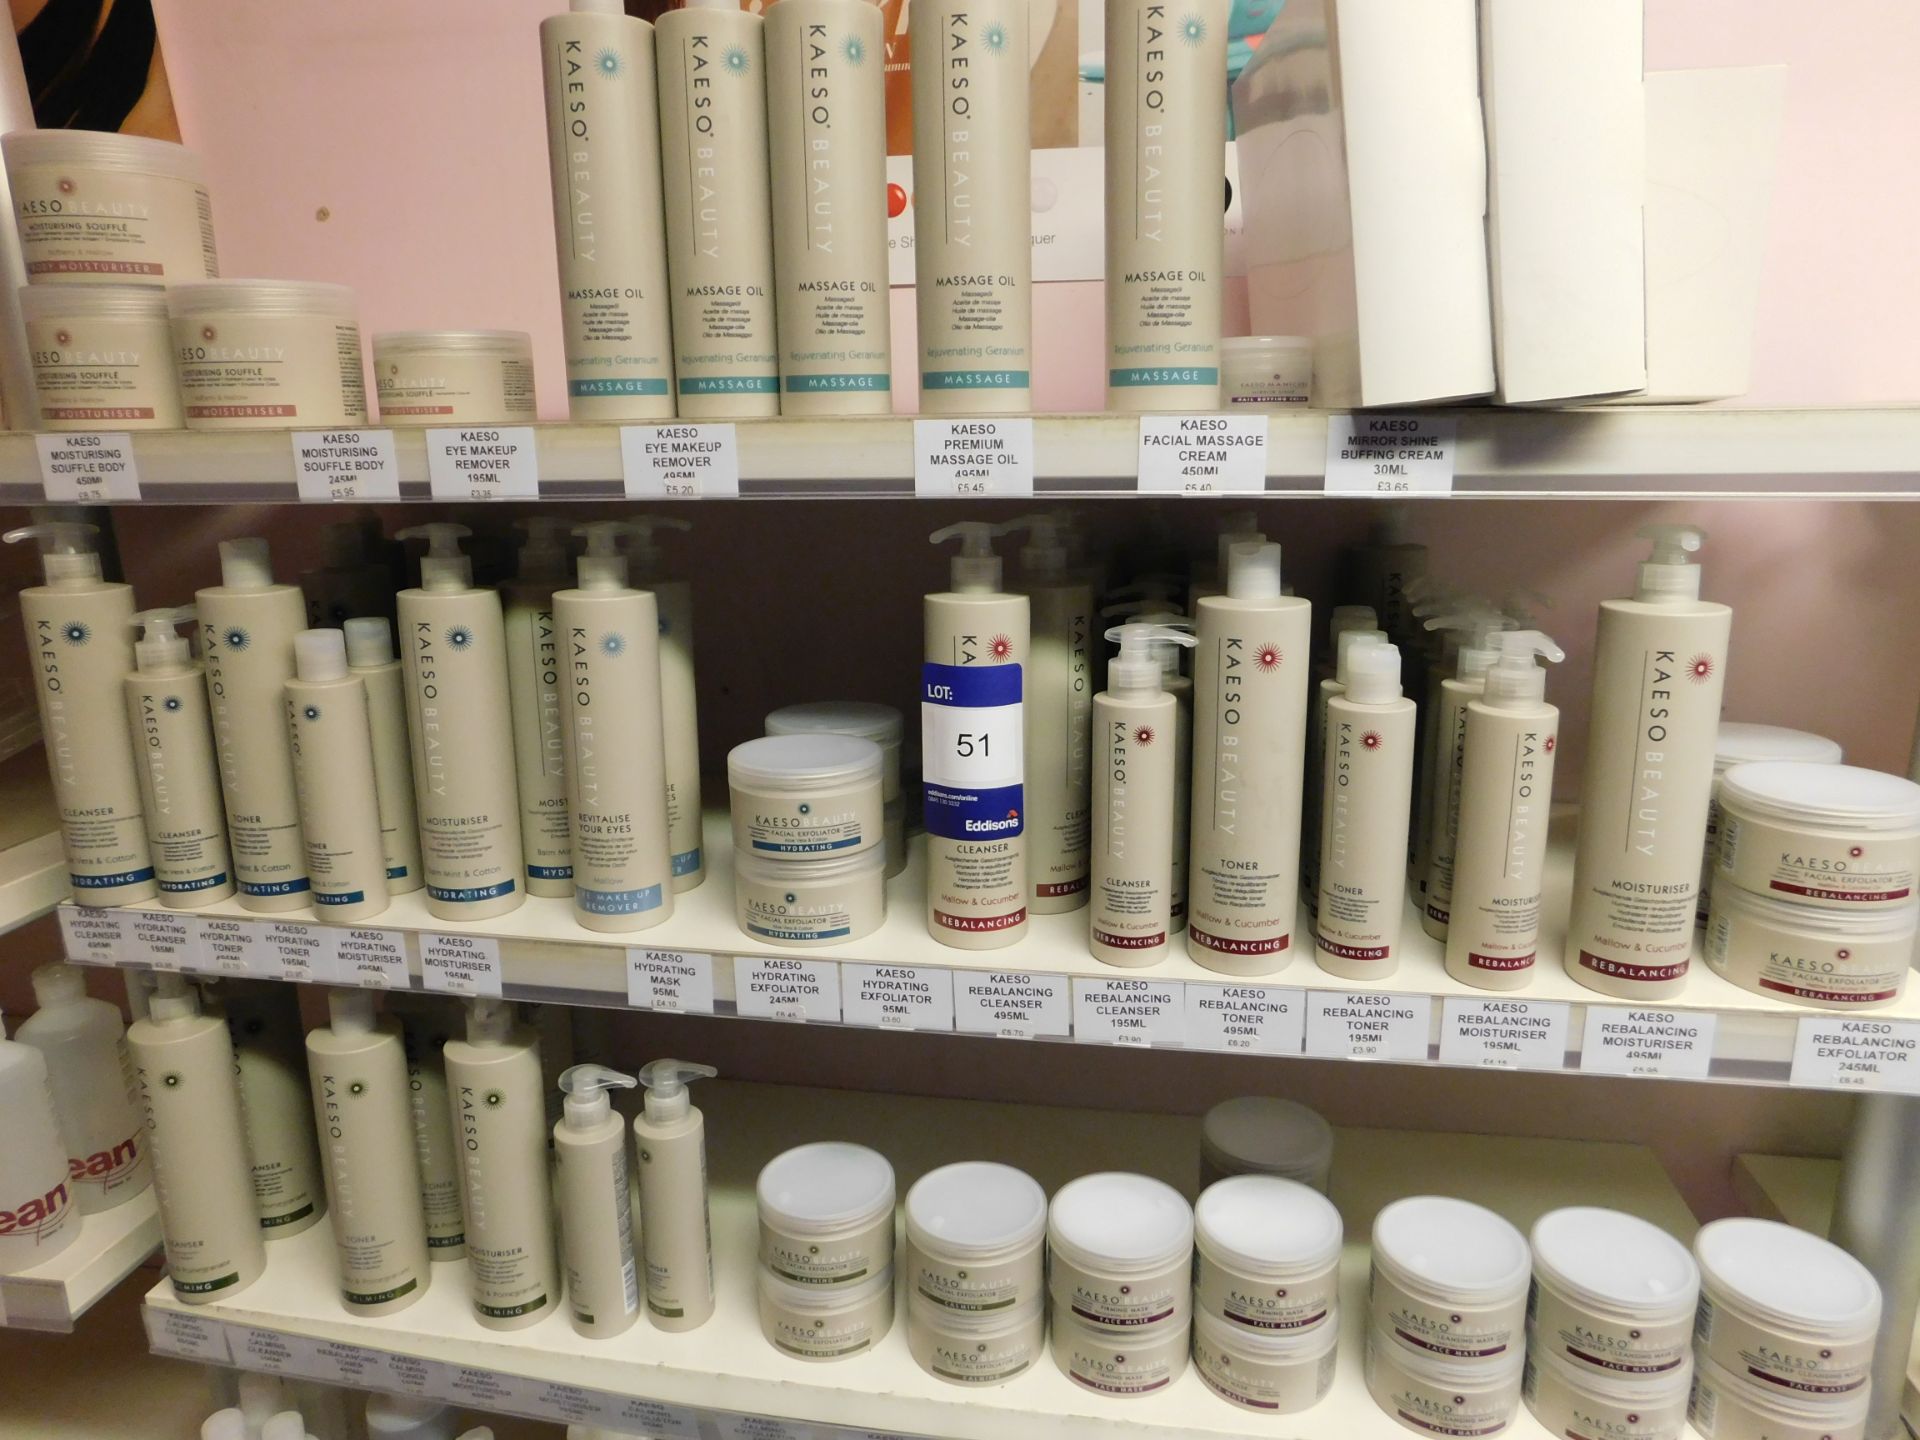 Assortment of beauty treatment products to shelving, including toner, hand treatment cream, - Image 2 of 4